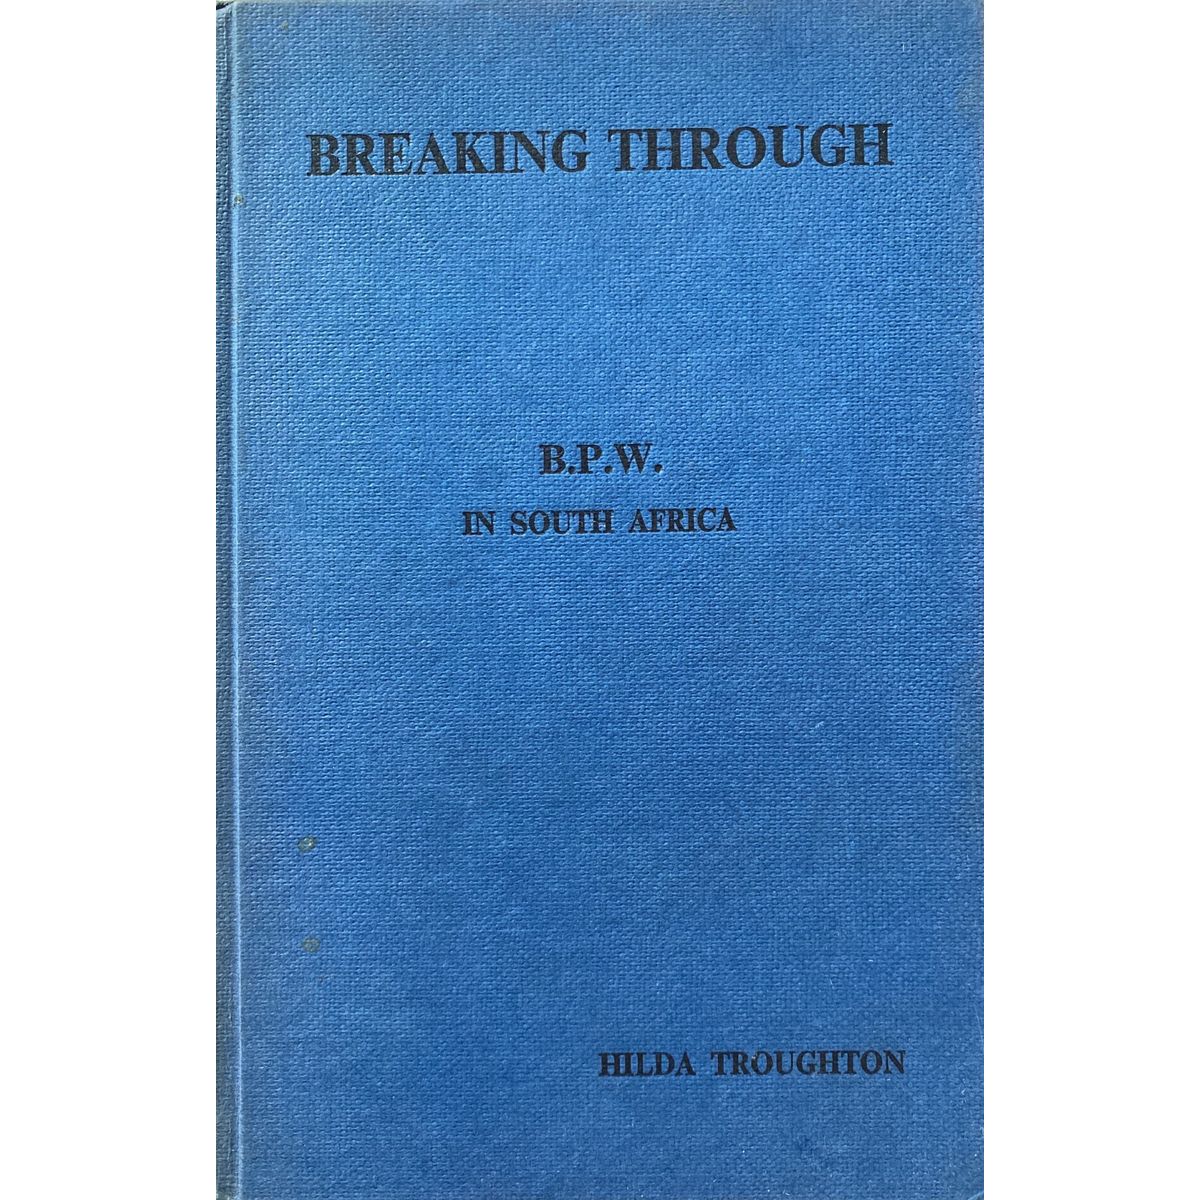 Breaking Through: A History of Business and Professional Women in South Africa by Hilda Troughton, Signed [1970]